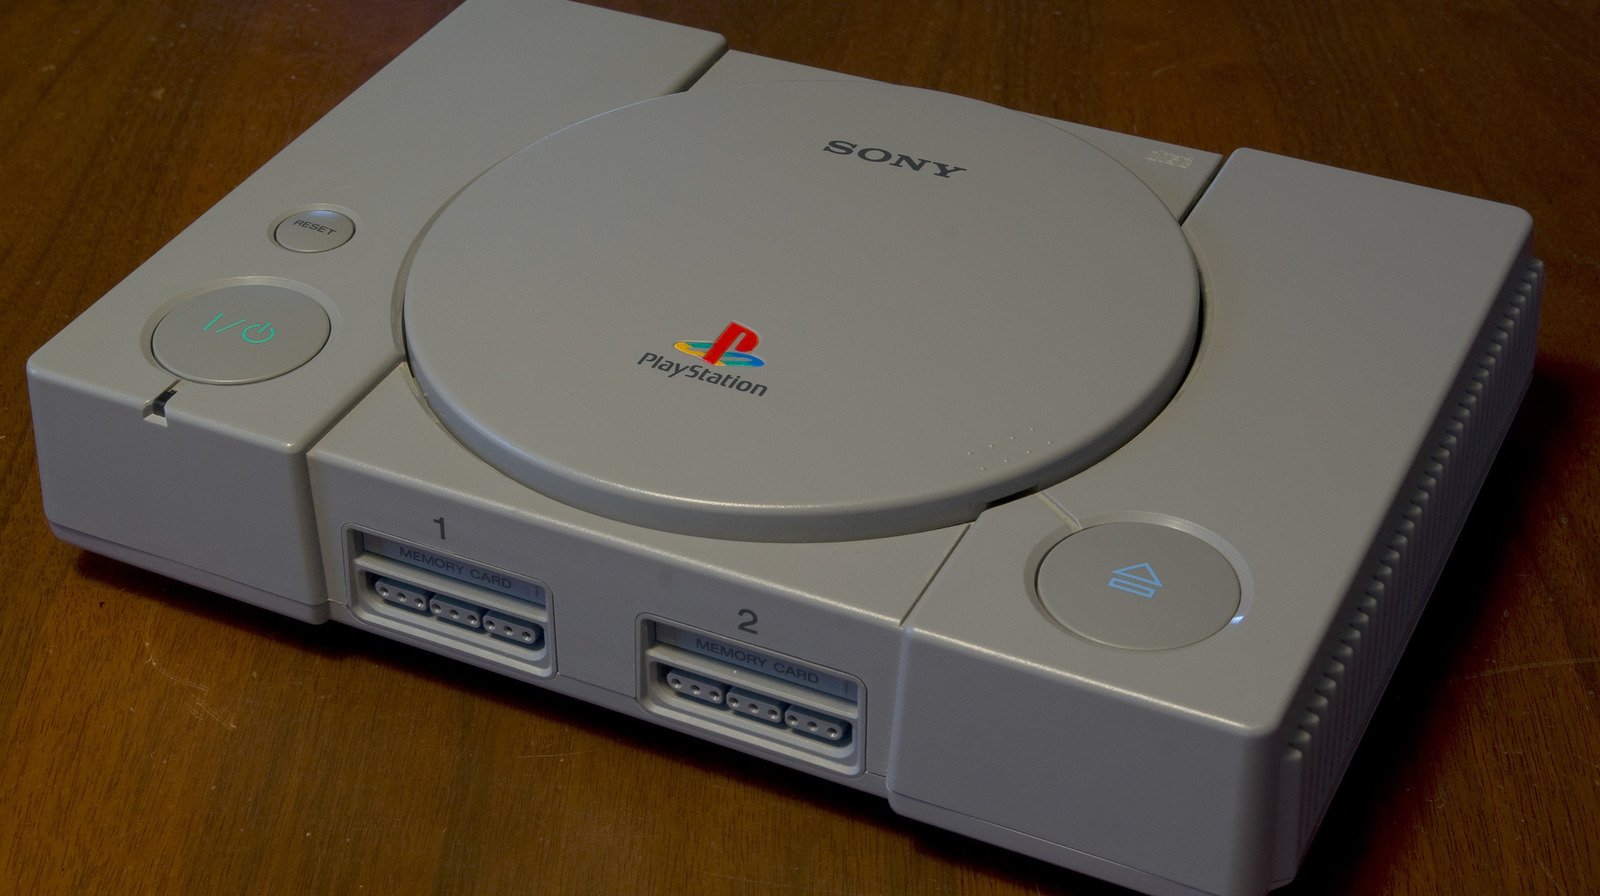 This PS1 Trick Resurfaces After Years Of Being Forgotten